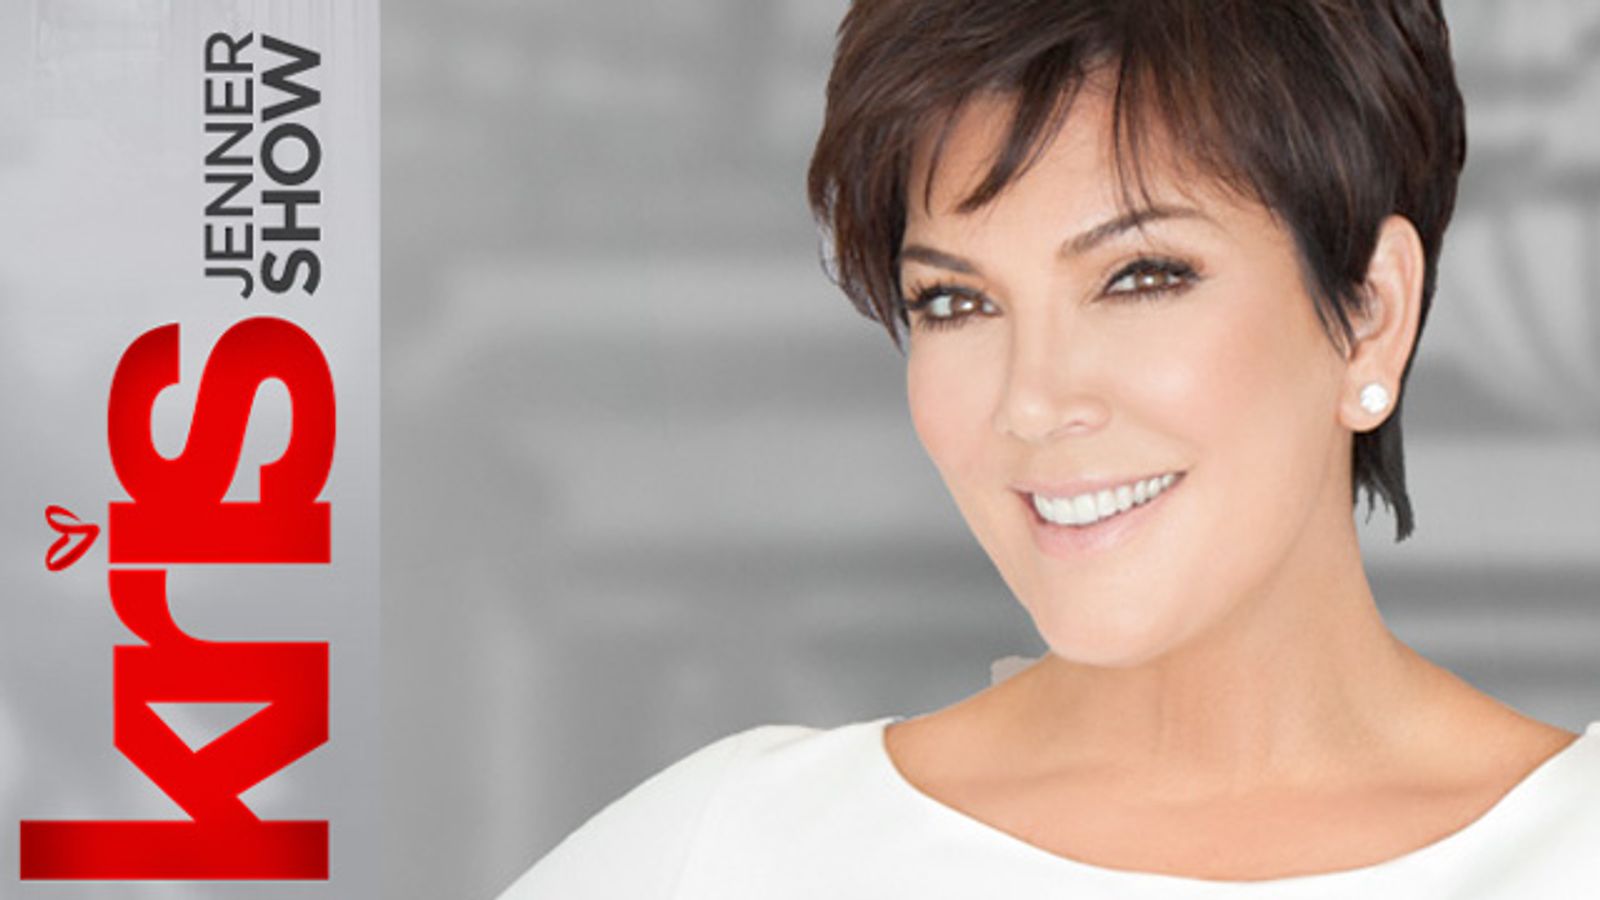 Novelty Products Make Appearance On 'Kris Jenner Show'